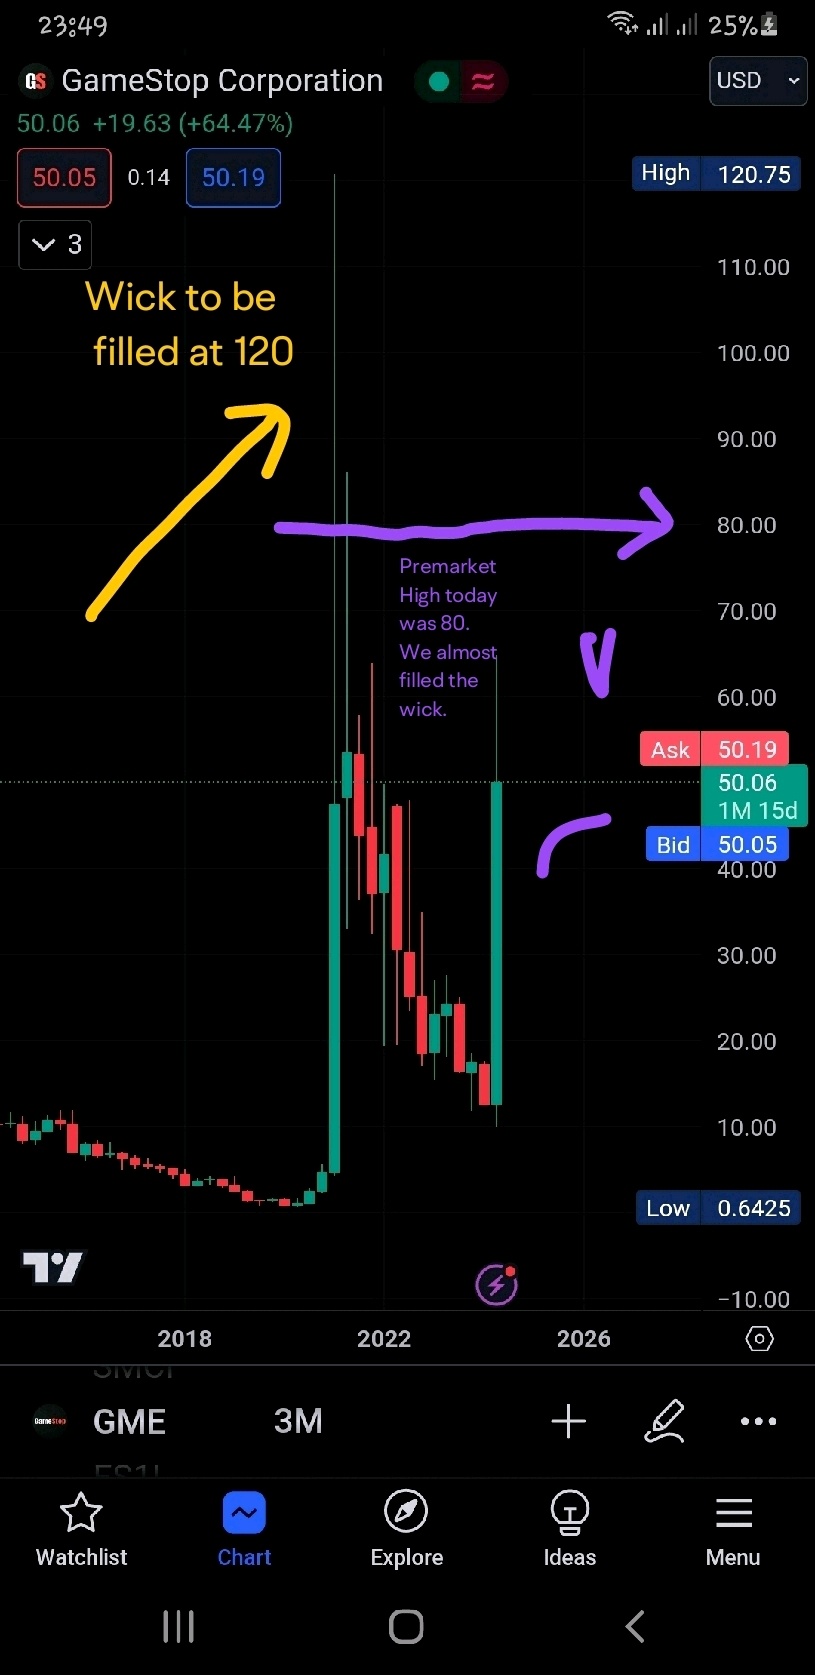 $GameStop (GME.US)$ I believe 120 can be filled soon. Wick always gives you a glimpse of the future. Just hodl 🤣